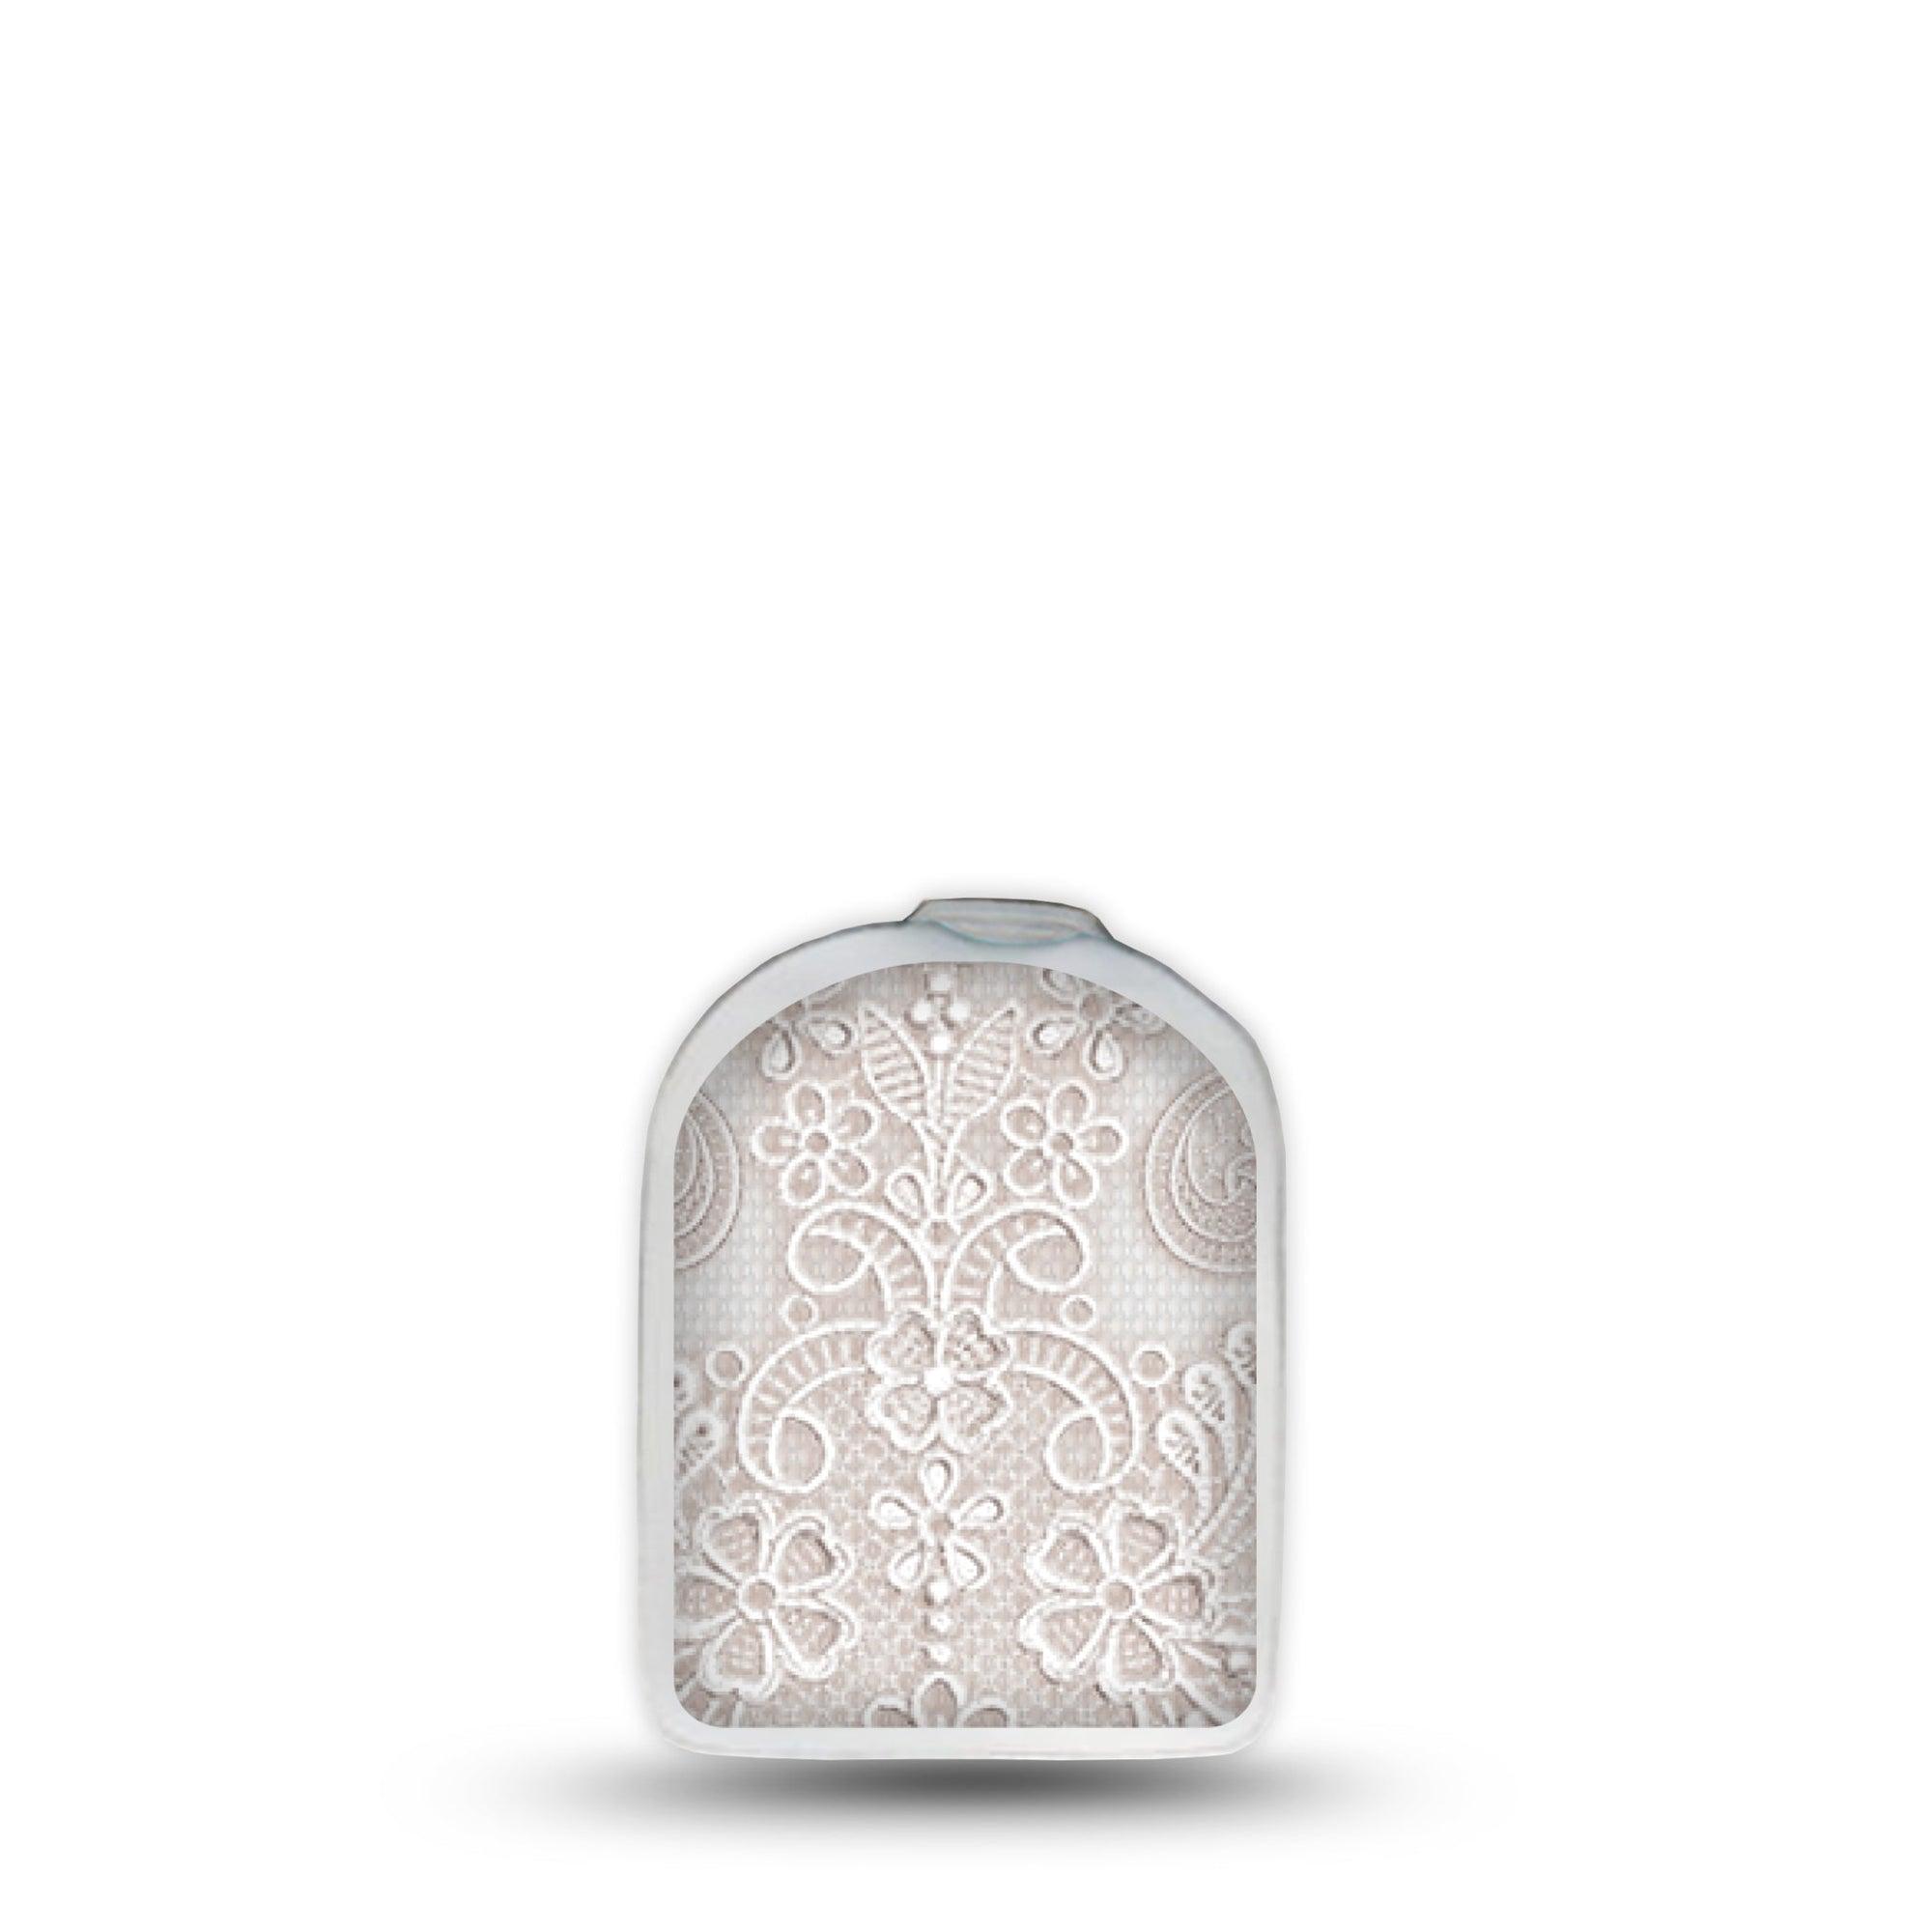 ExpressionMed Vintage Lace Omnipod Surface Center Sticker Single Sticker Delicate White Lace Themed Vinyl Decoration Pump Design